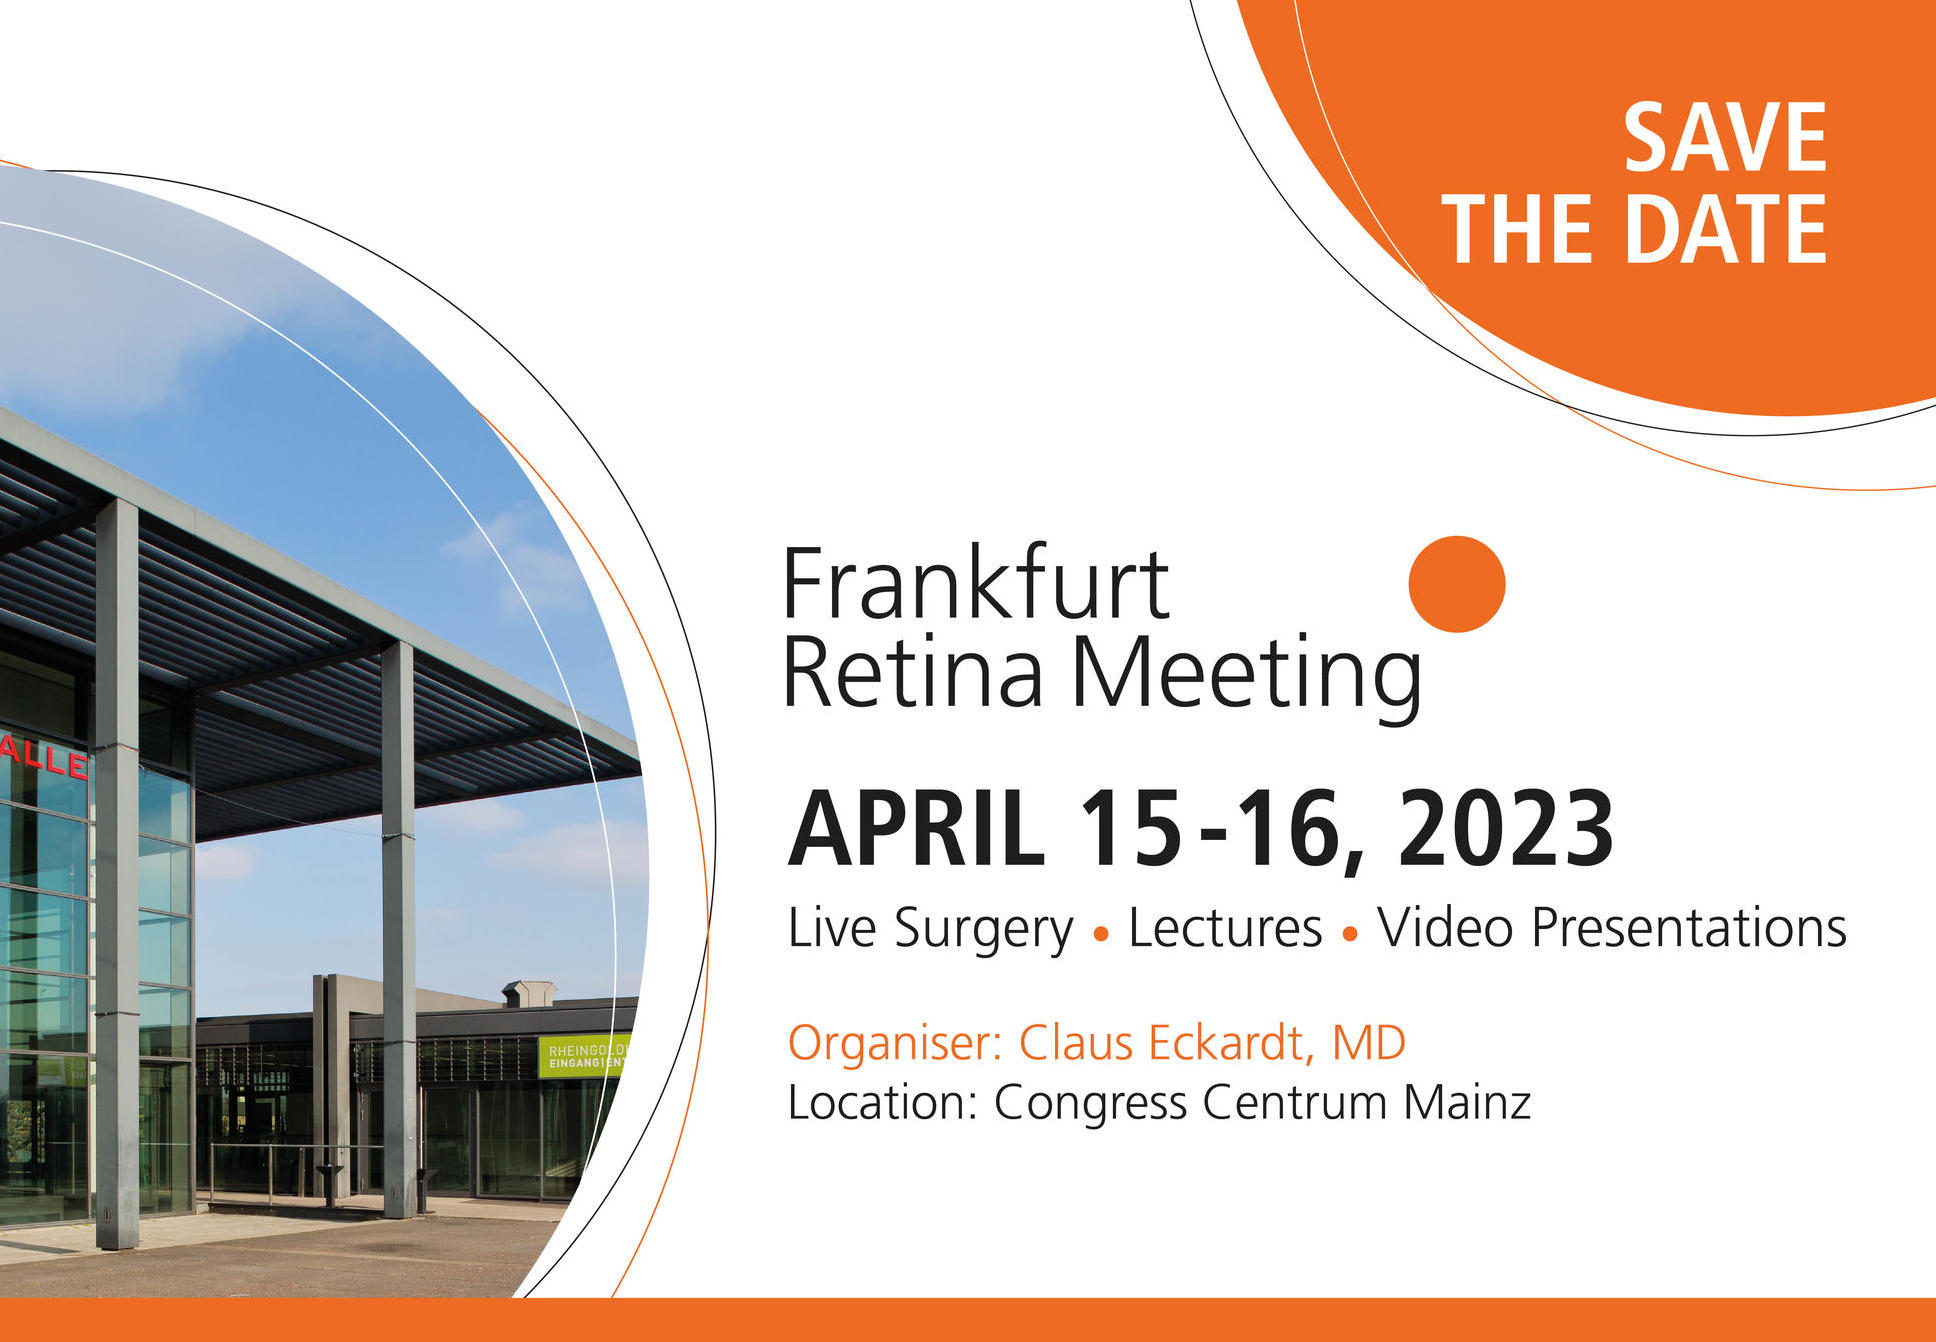 Frankfurt Retina Meeting 2023 on April 15 - 16, 2023: live surgery, presentations, panel discussions and videos